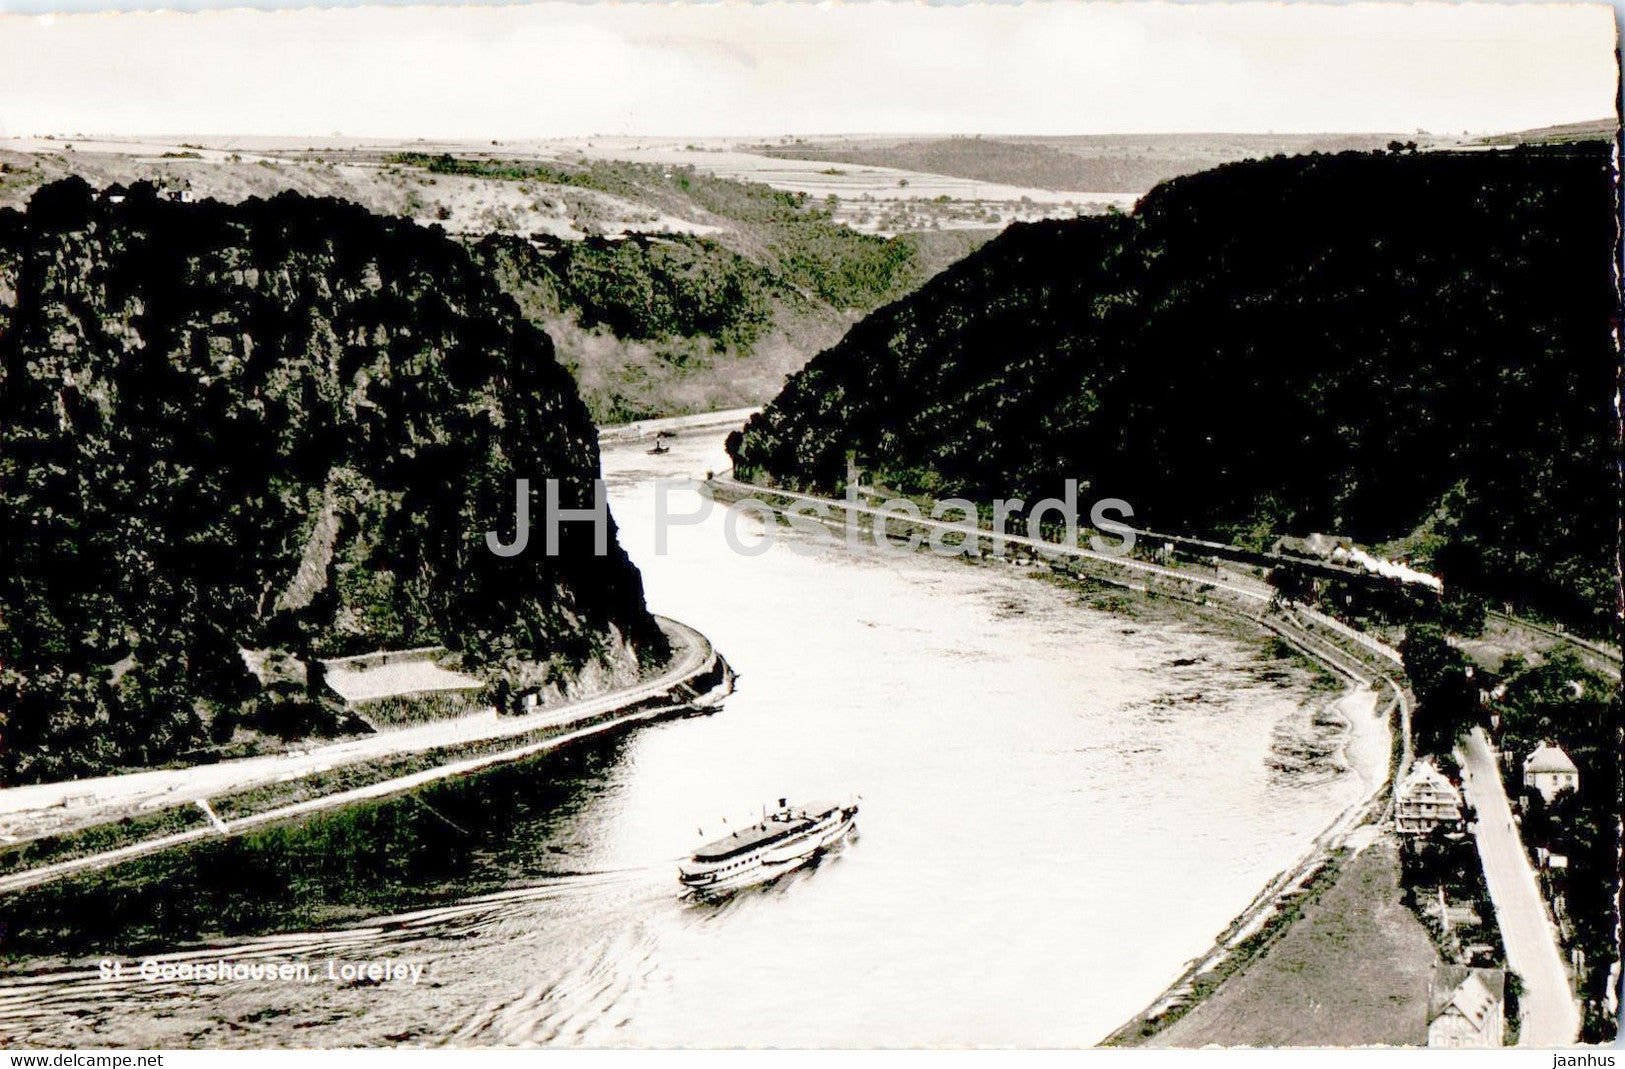 St Goarshausen - Loreley - ship - old postcard - 1954 - Germany - used - JH Postcards